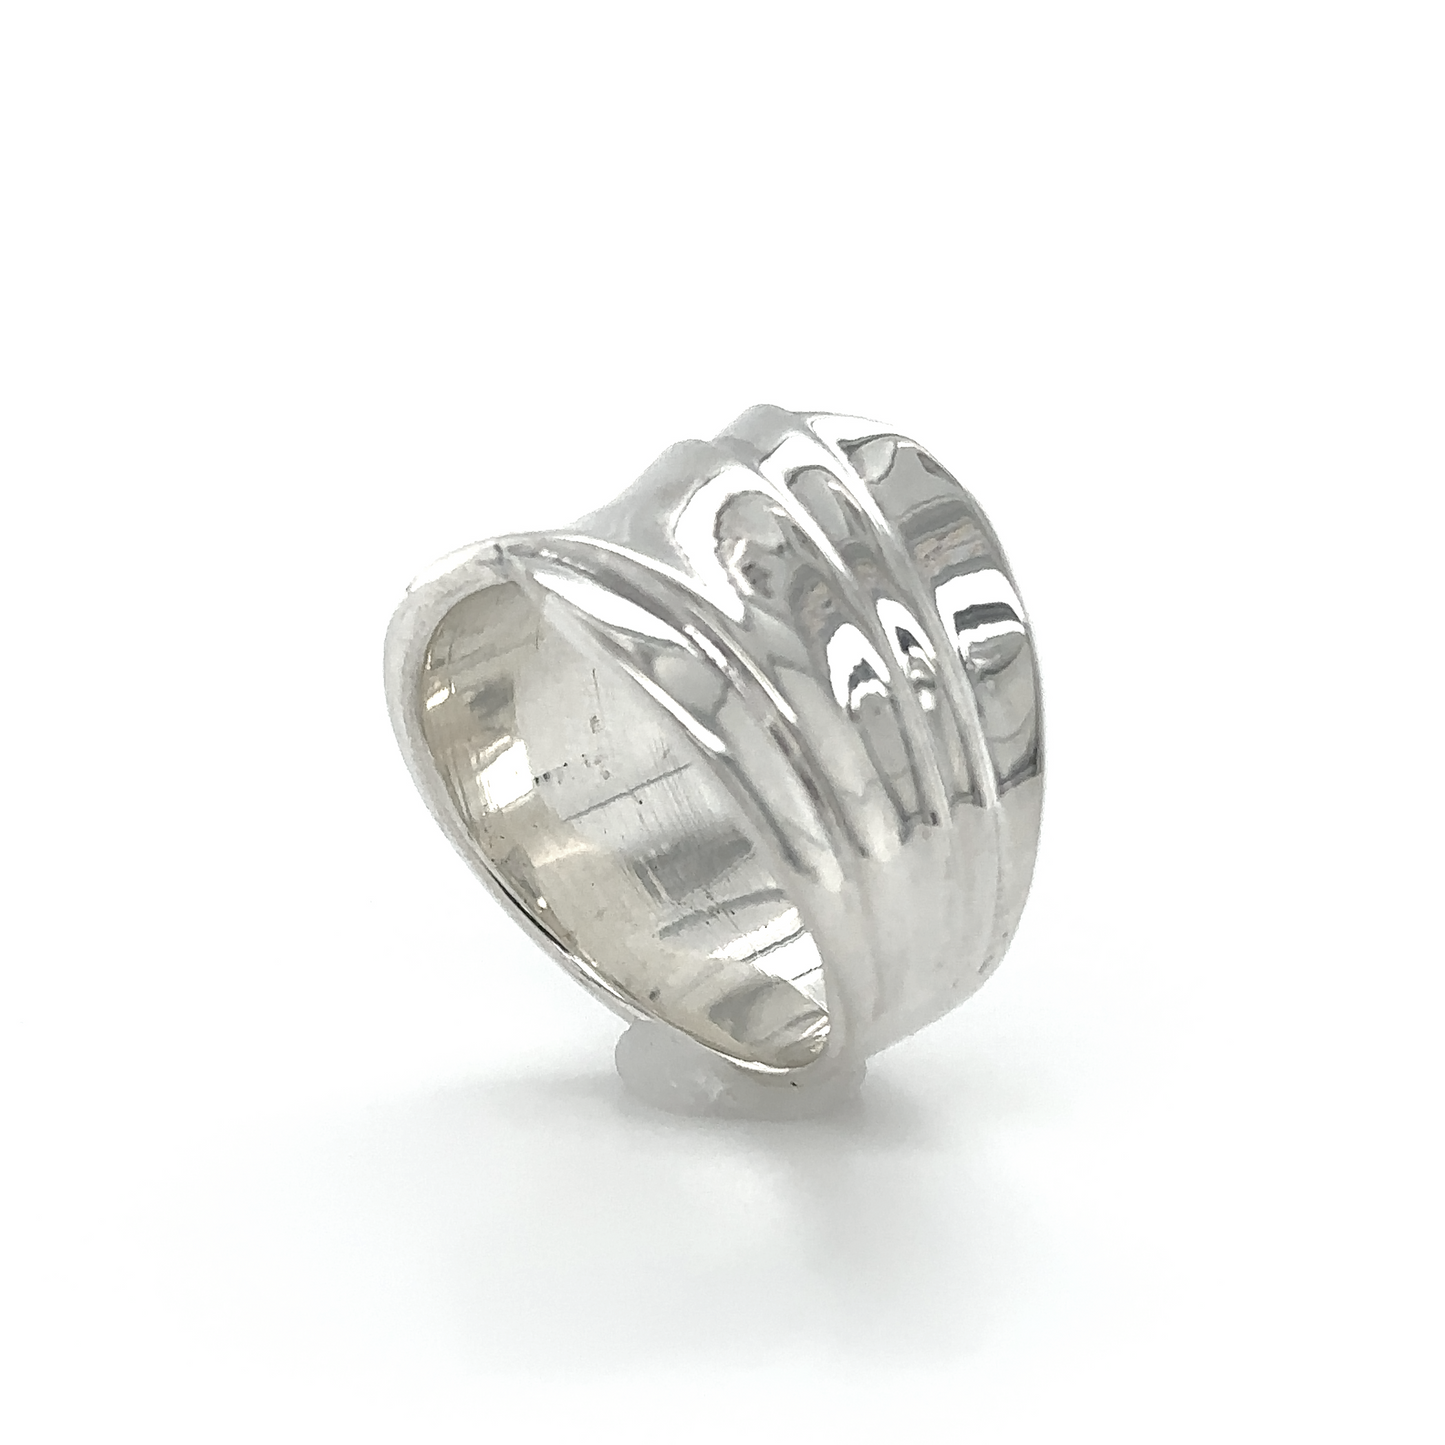 A sophisticated Cigar Band Silver Ring on a white background.